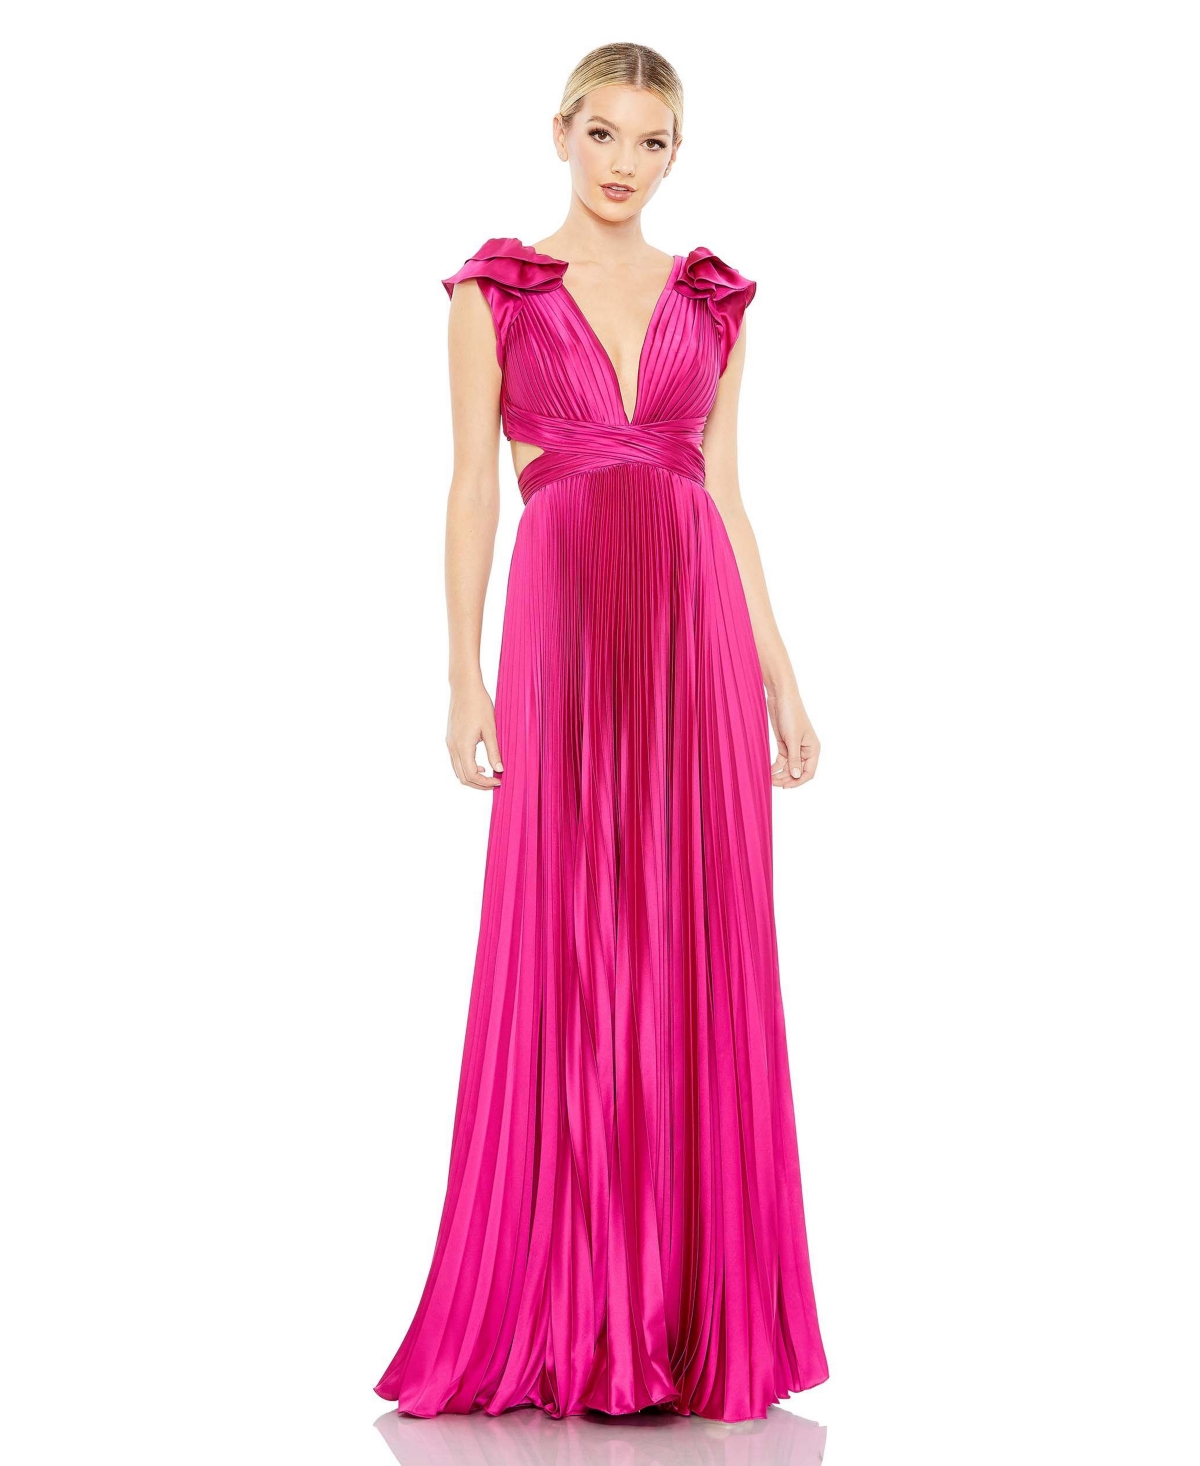 Women's Ieena Pleated Ruffled Cap Sleeve Cut Out Lace Up Gown - Fuchsia